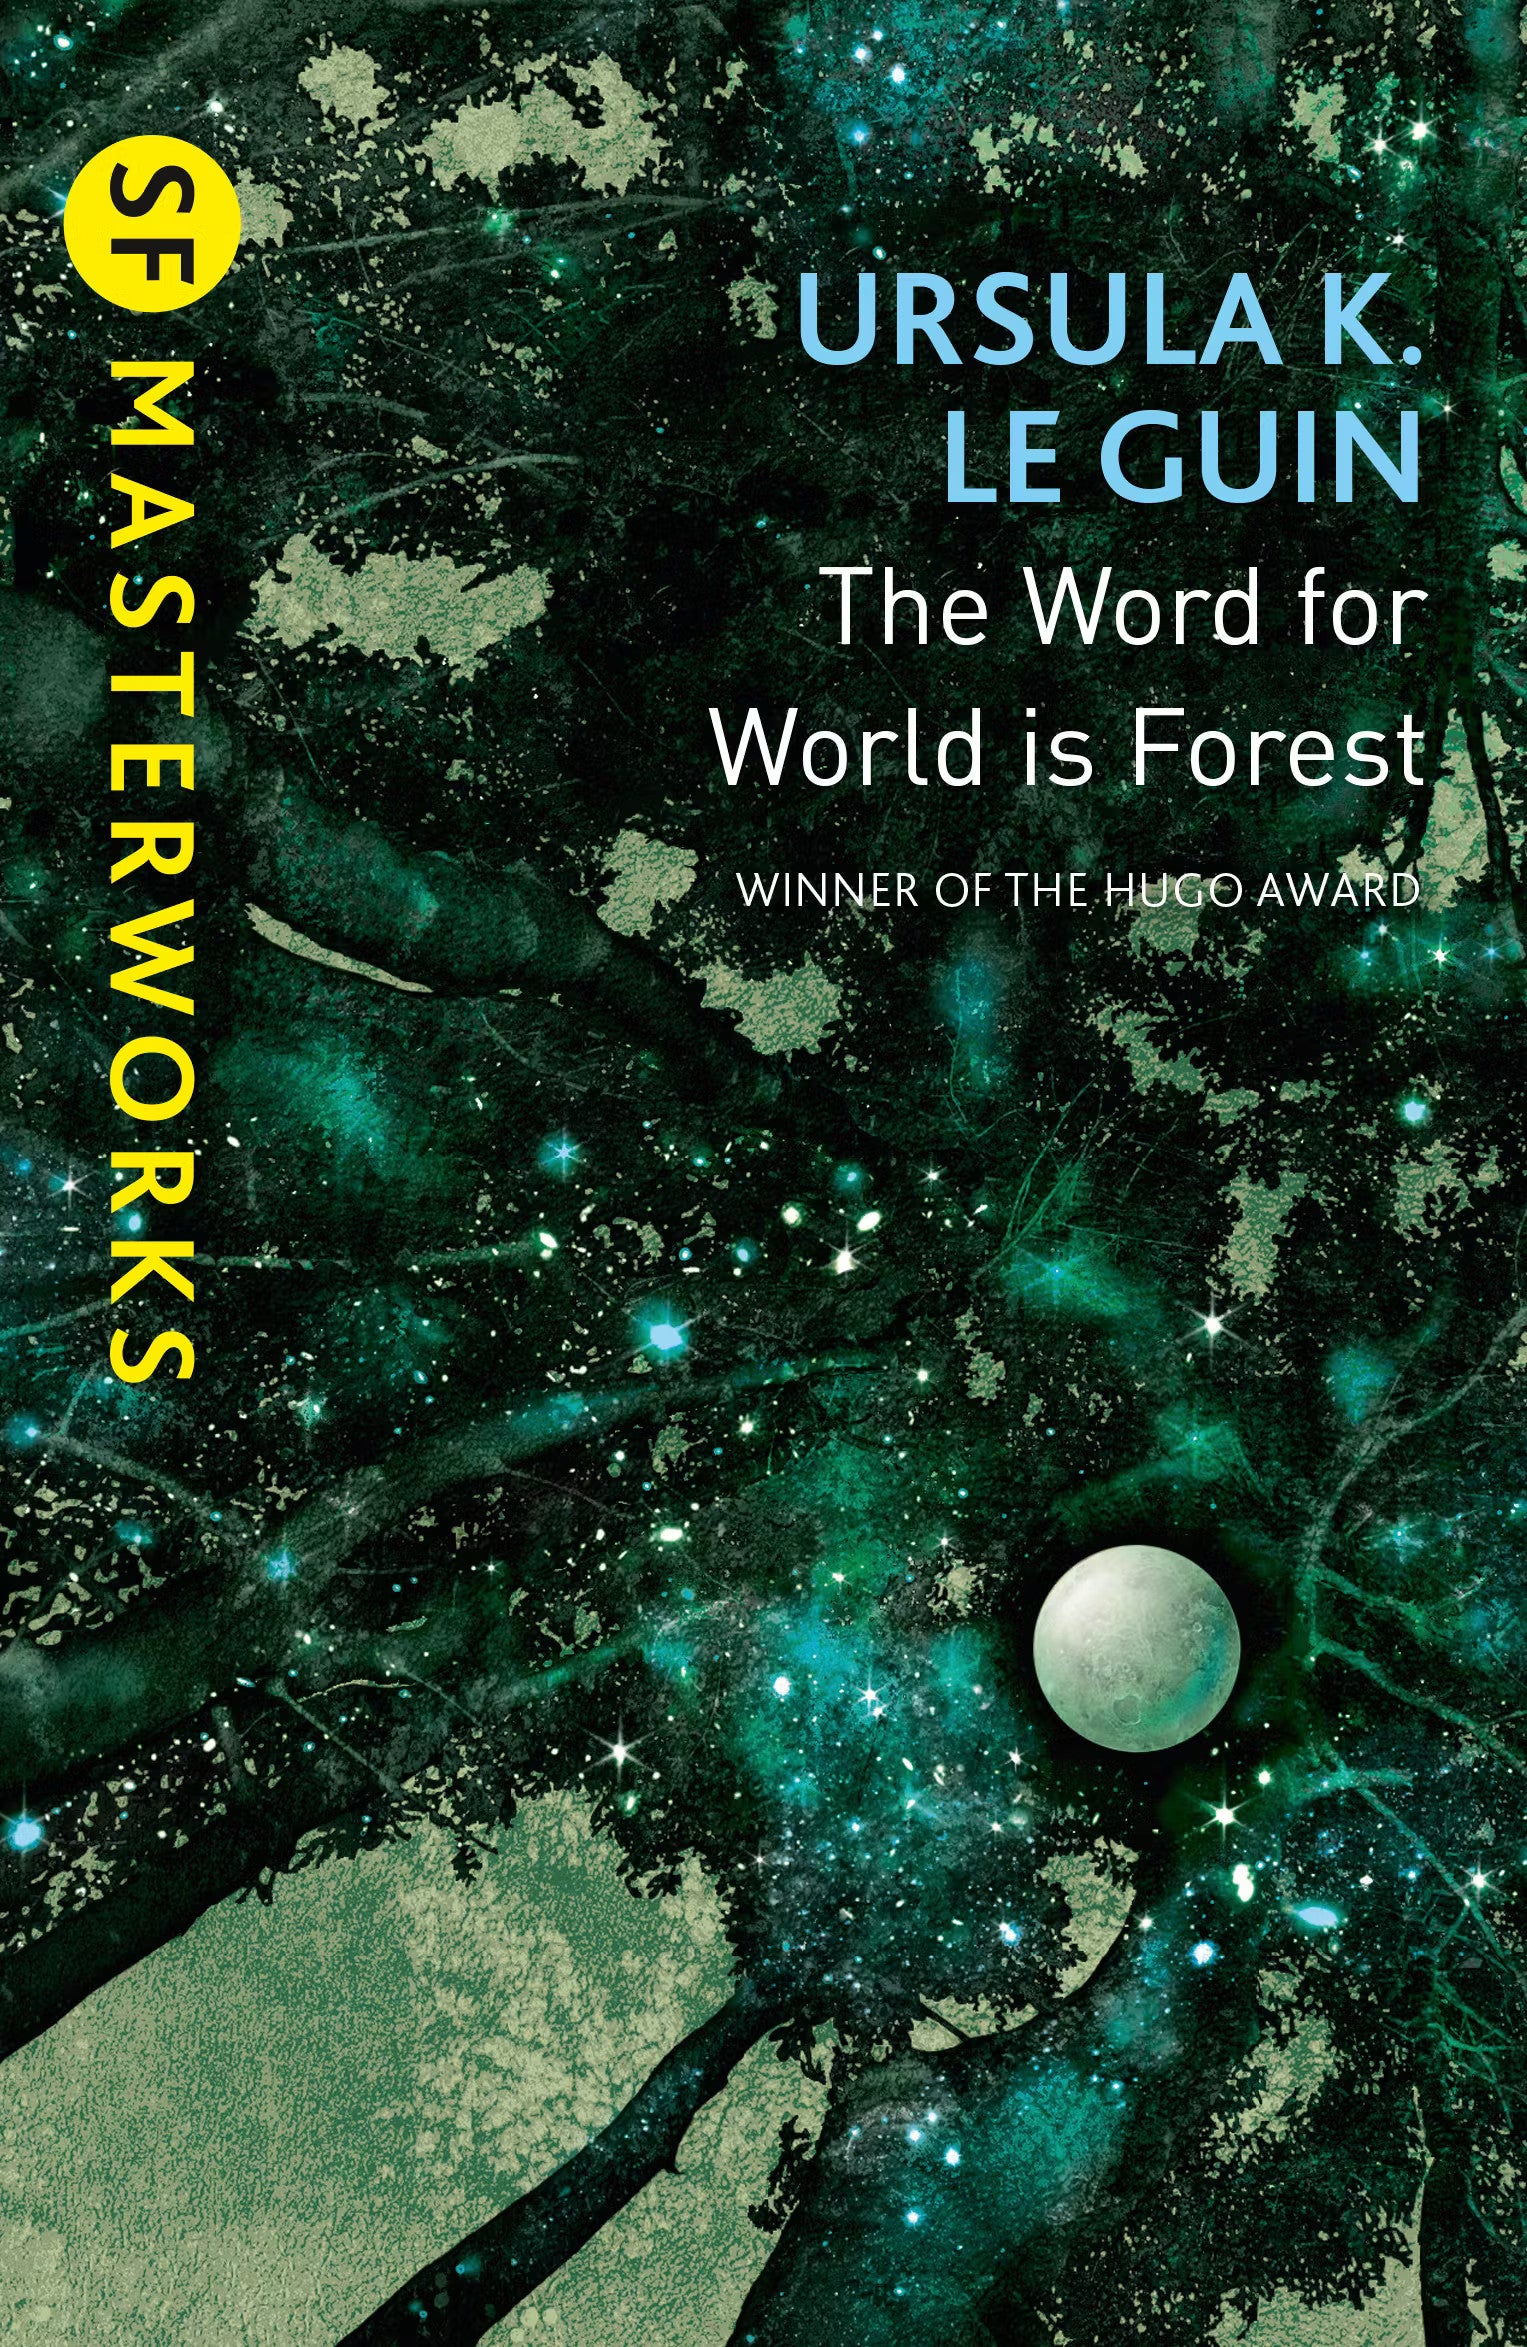 Book cover for The Word for World is Forest by Ursula K Le Guin